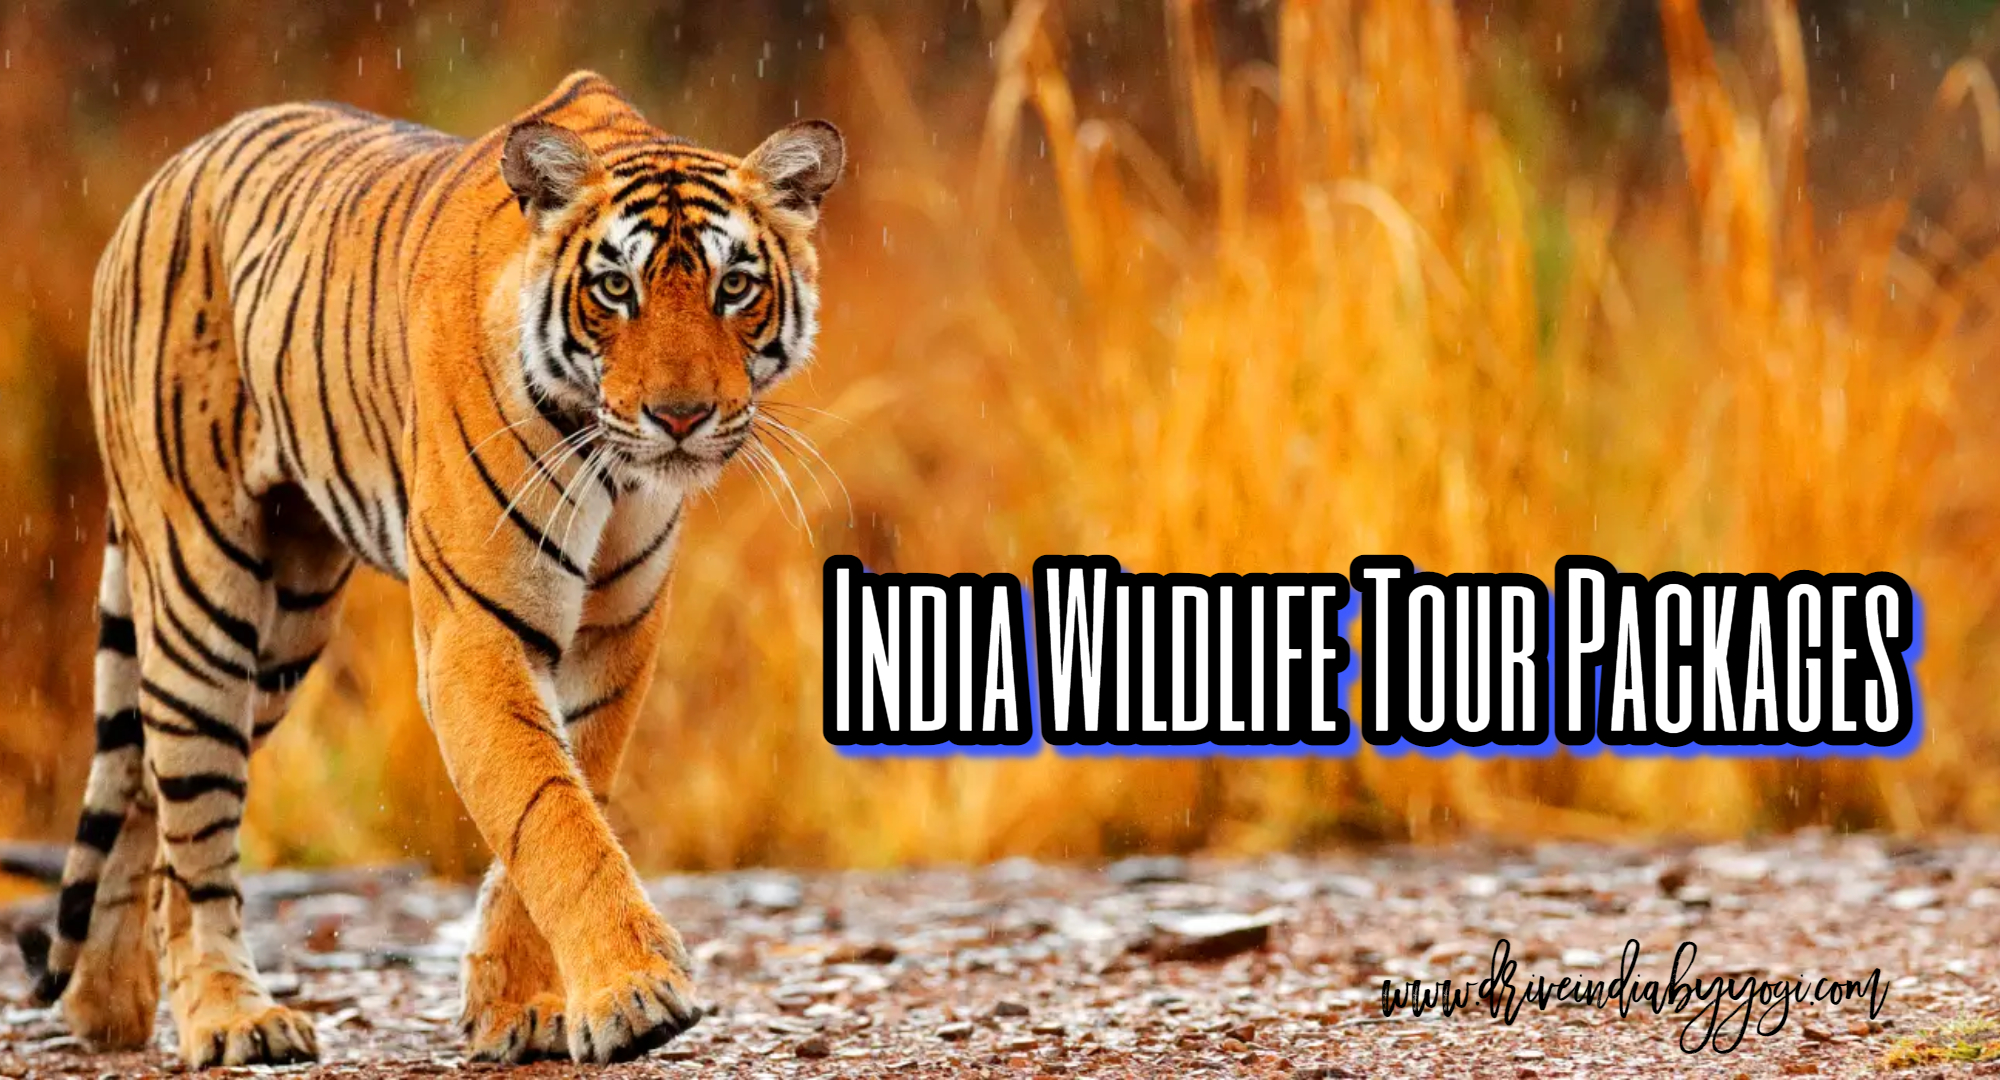 india wildlife tour packages, best india tour packages, drive india by yogi, travel agency in india